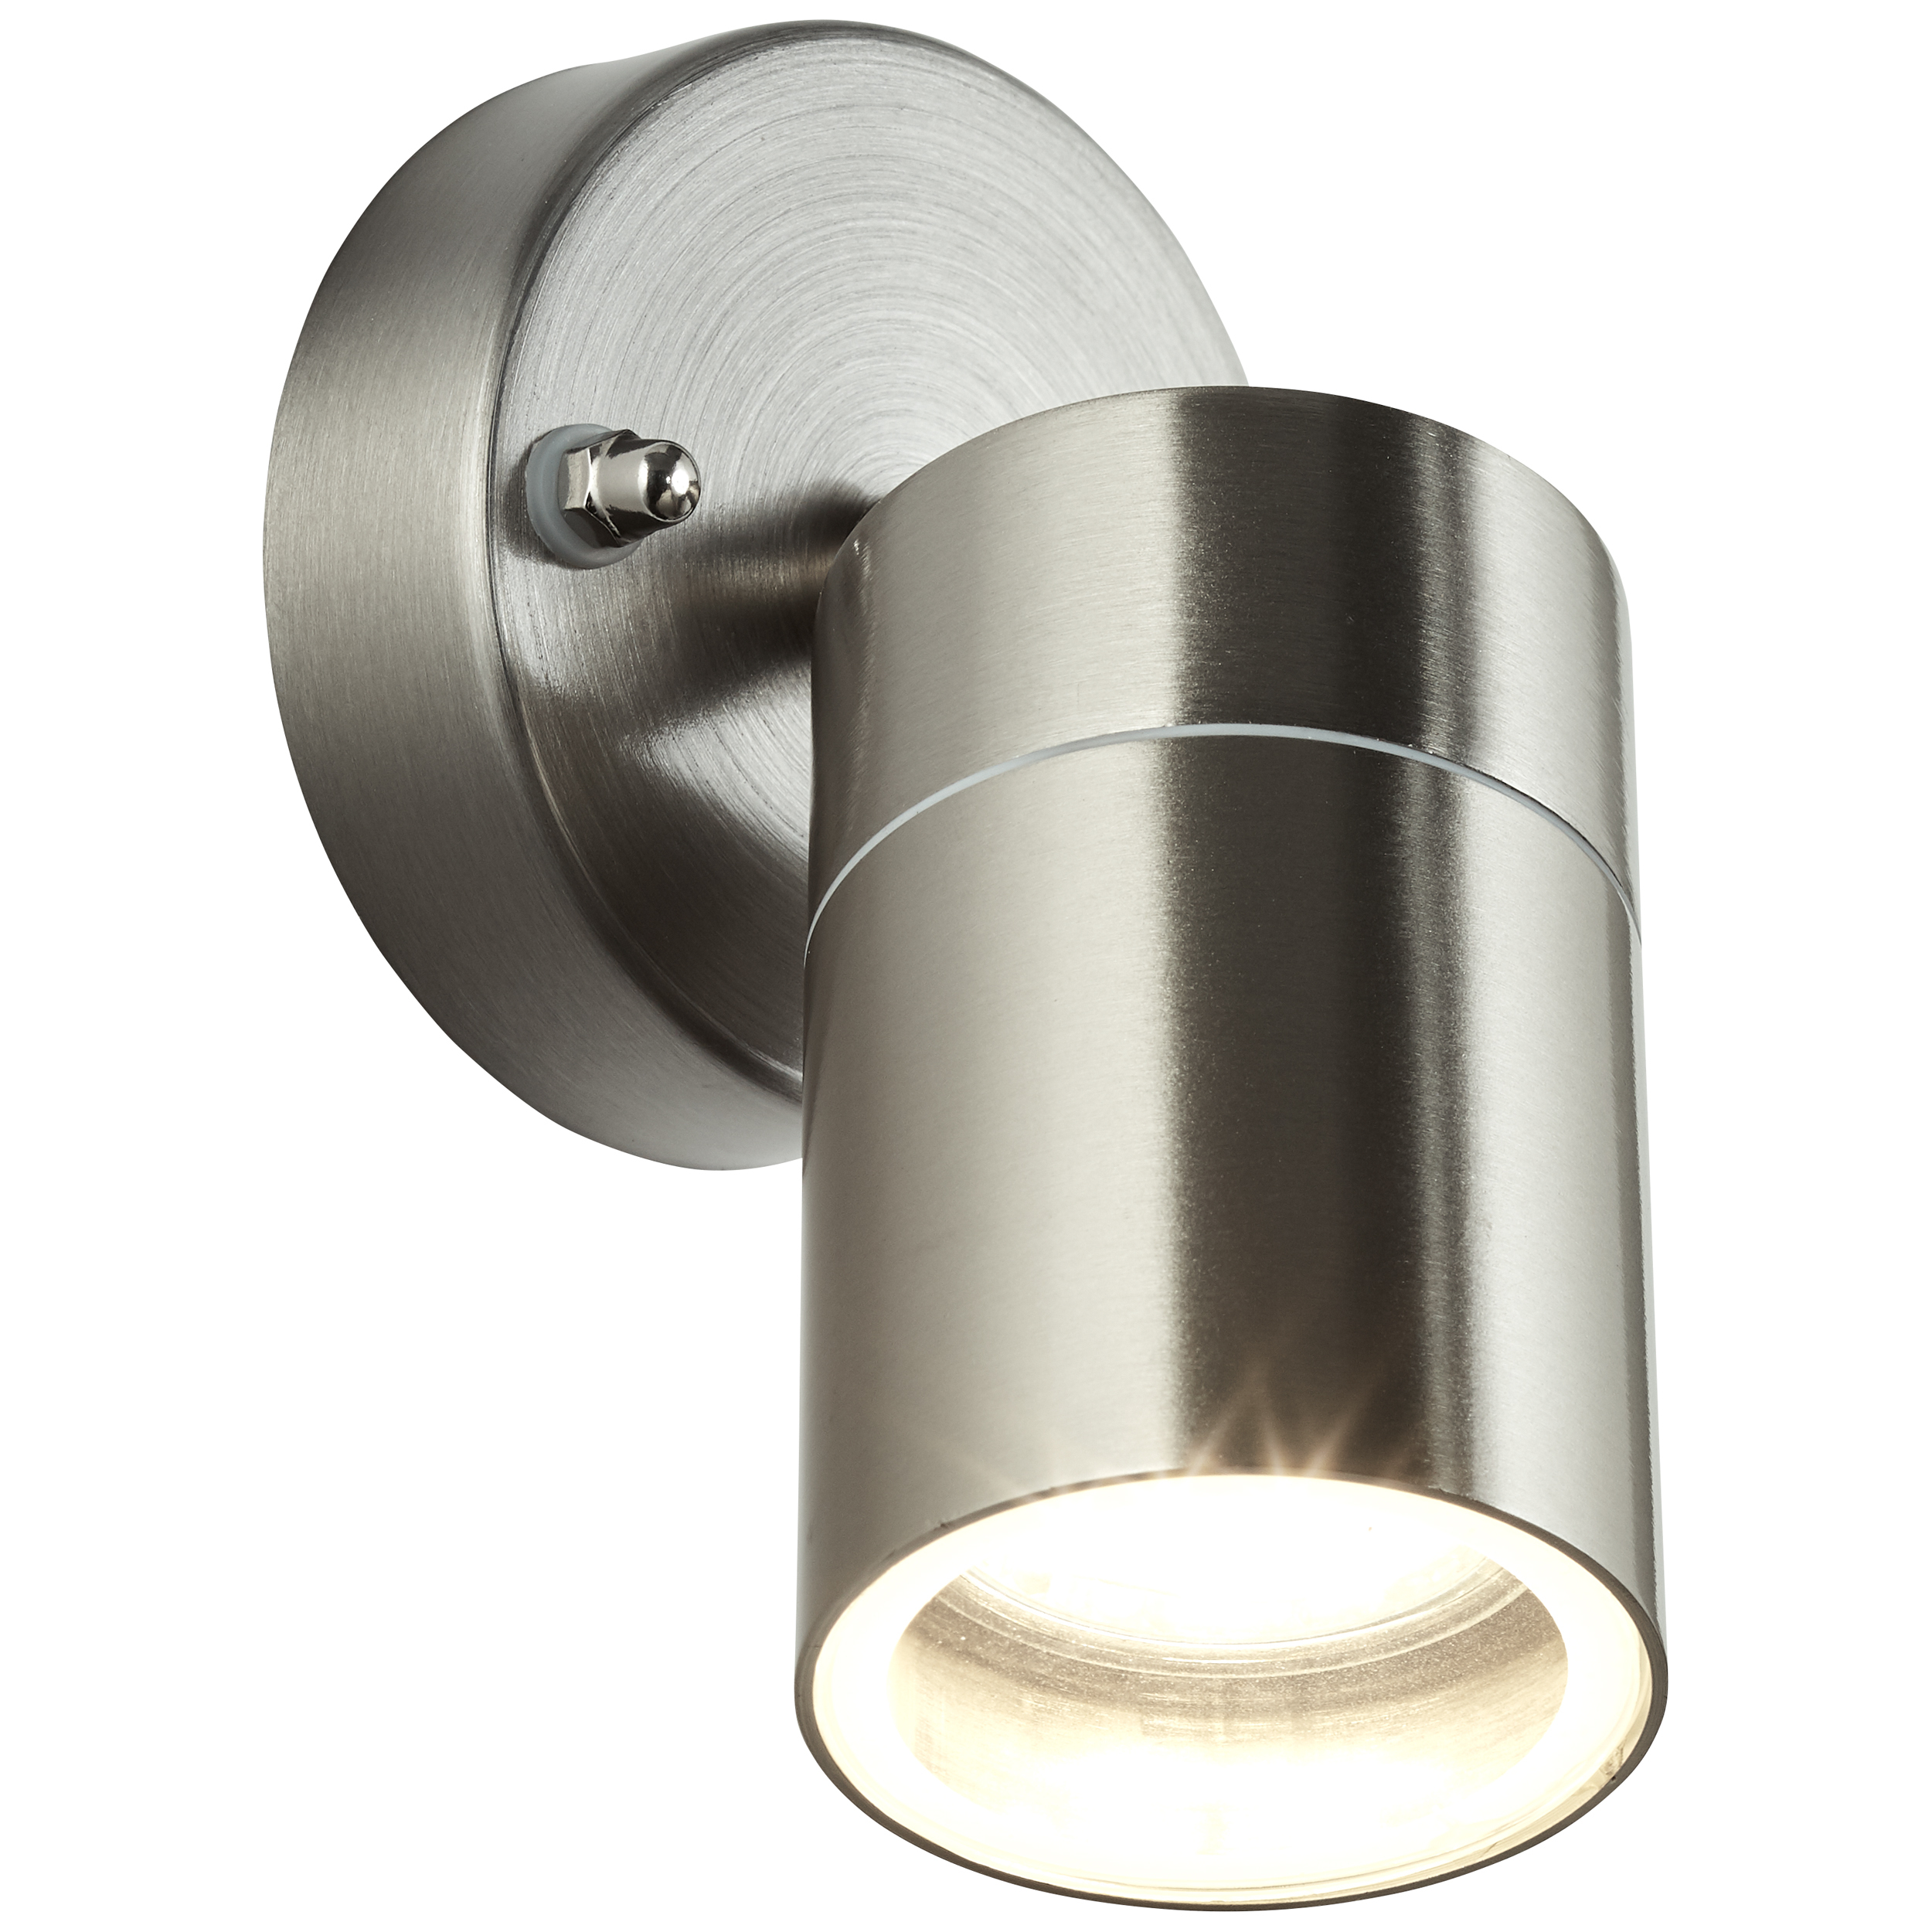 Jandy outdoor | spotlight steel stainless 90965A82 wall